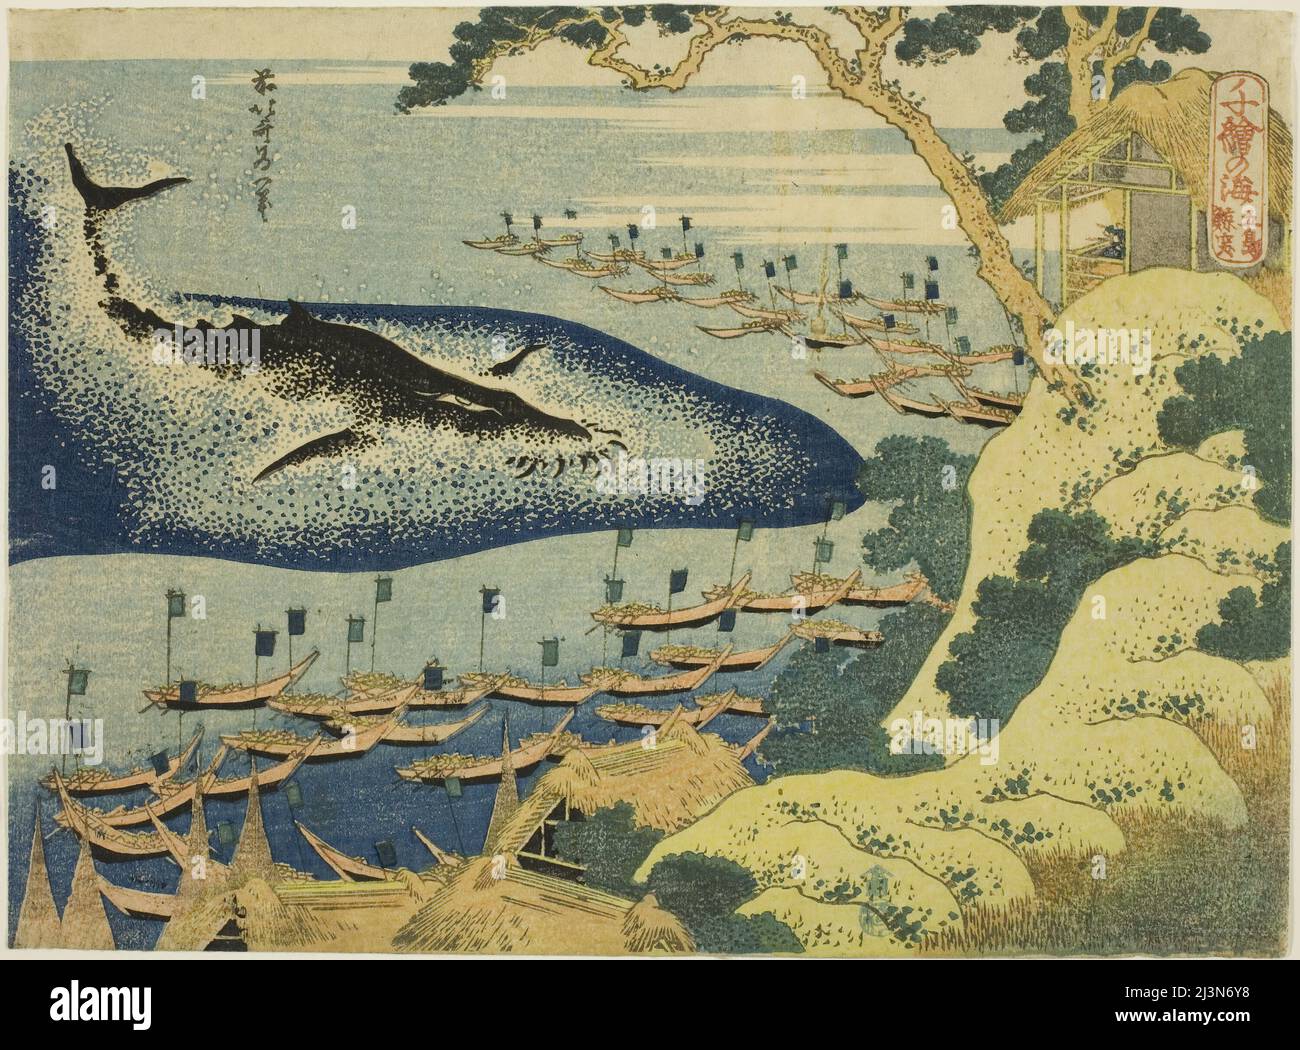 Whaling off the Coast of the Goto Islands (Goto kujira tsuki), from the series &quot;One Thousand Pictures of the Ocean (Chie no umi)&quot;, Japan, c. 1831-33. Stock Photo